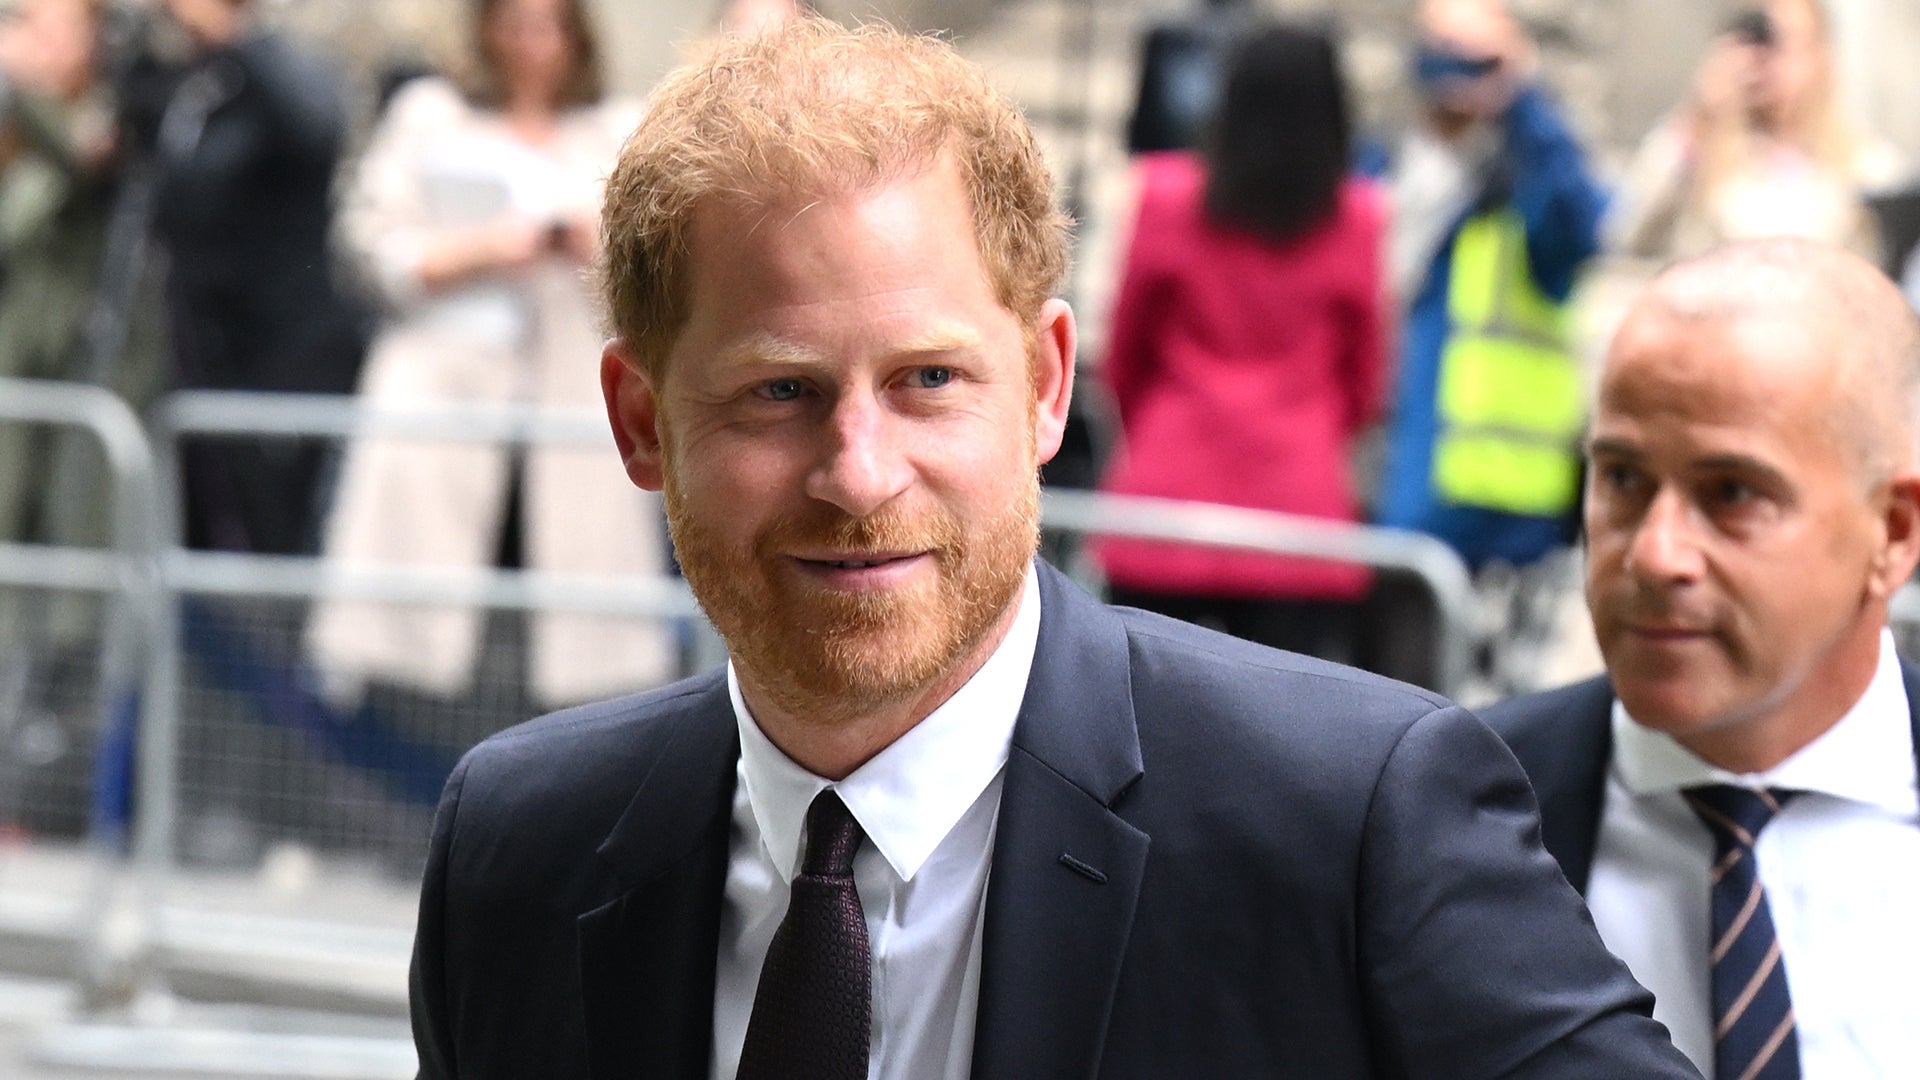 Prince Harry Makes History as First British Royal to Give Evidence in Court in More 100 Years